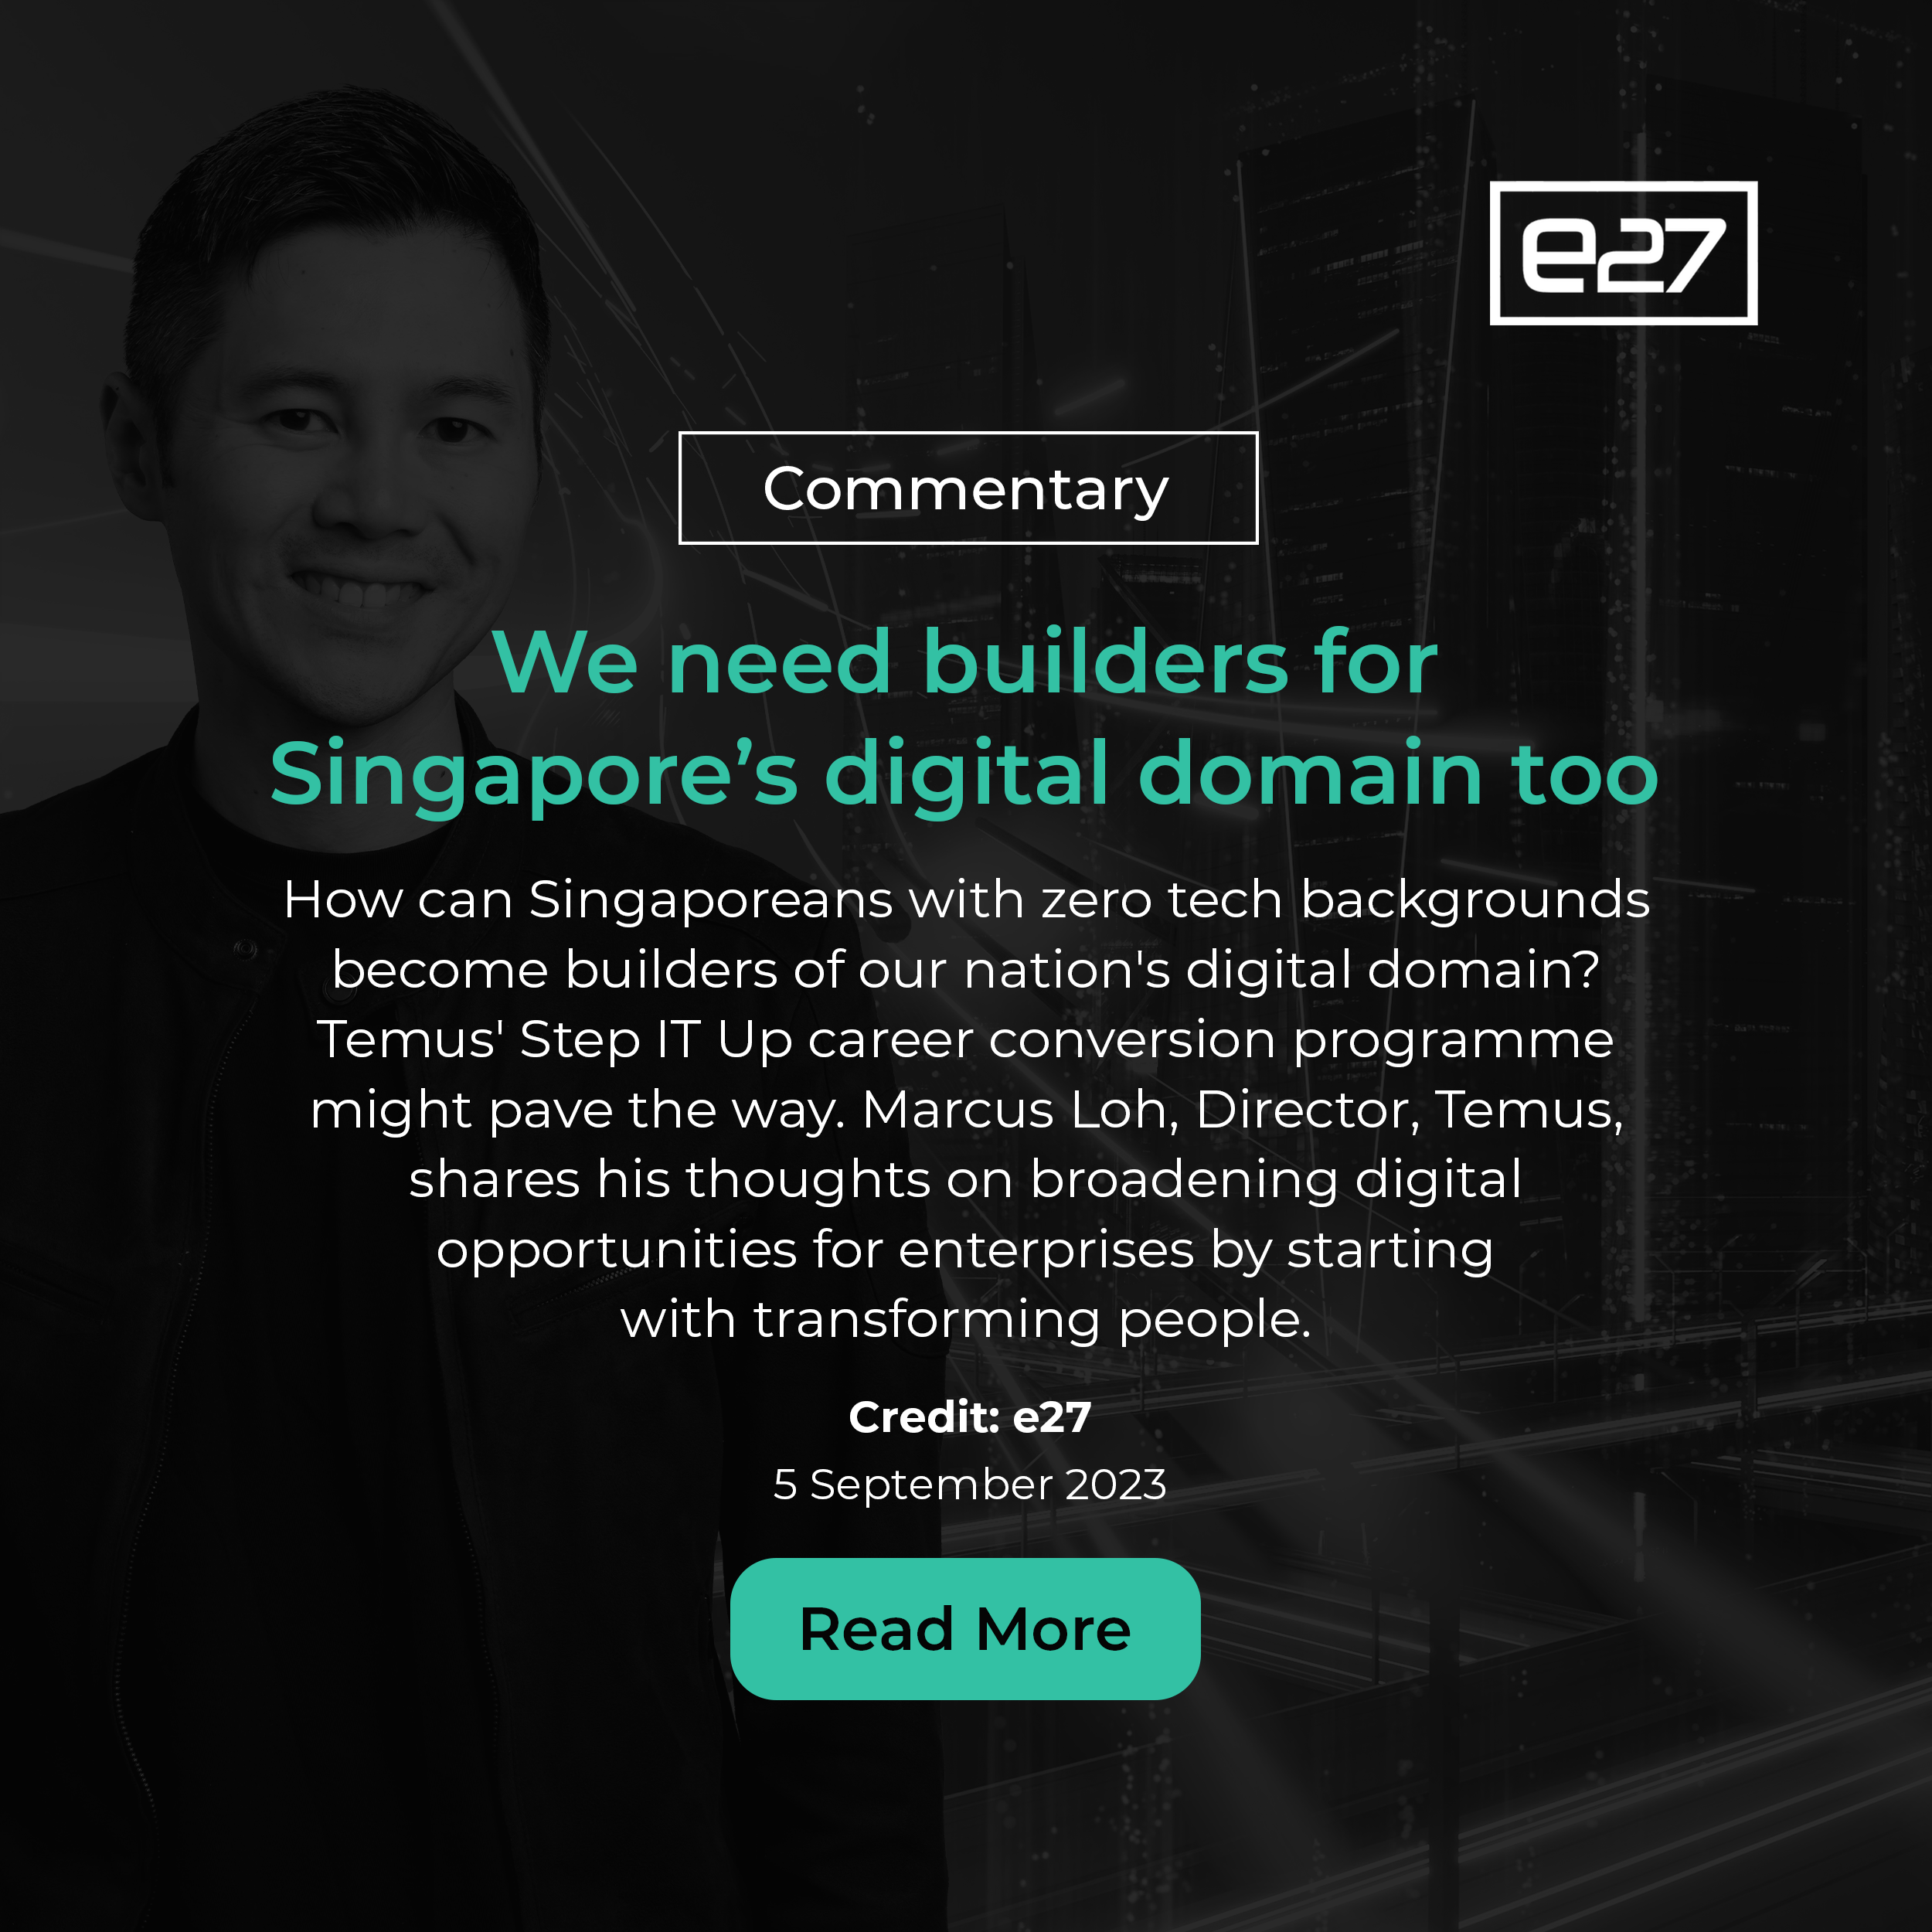 [Commentary] Beyond blocks, we need builders for Singapore’s digital domain too